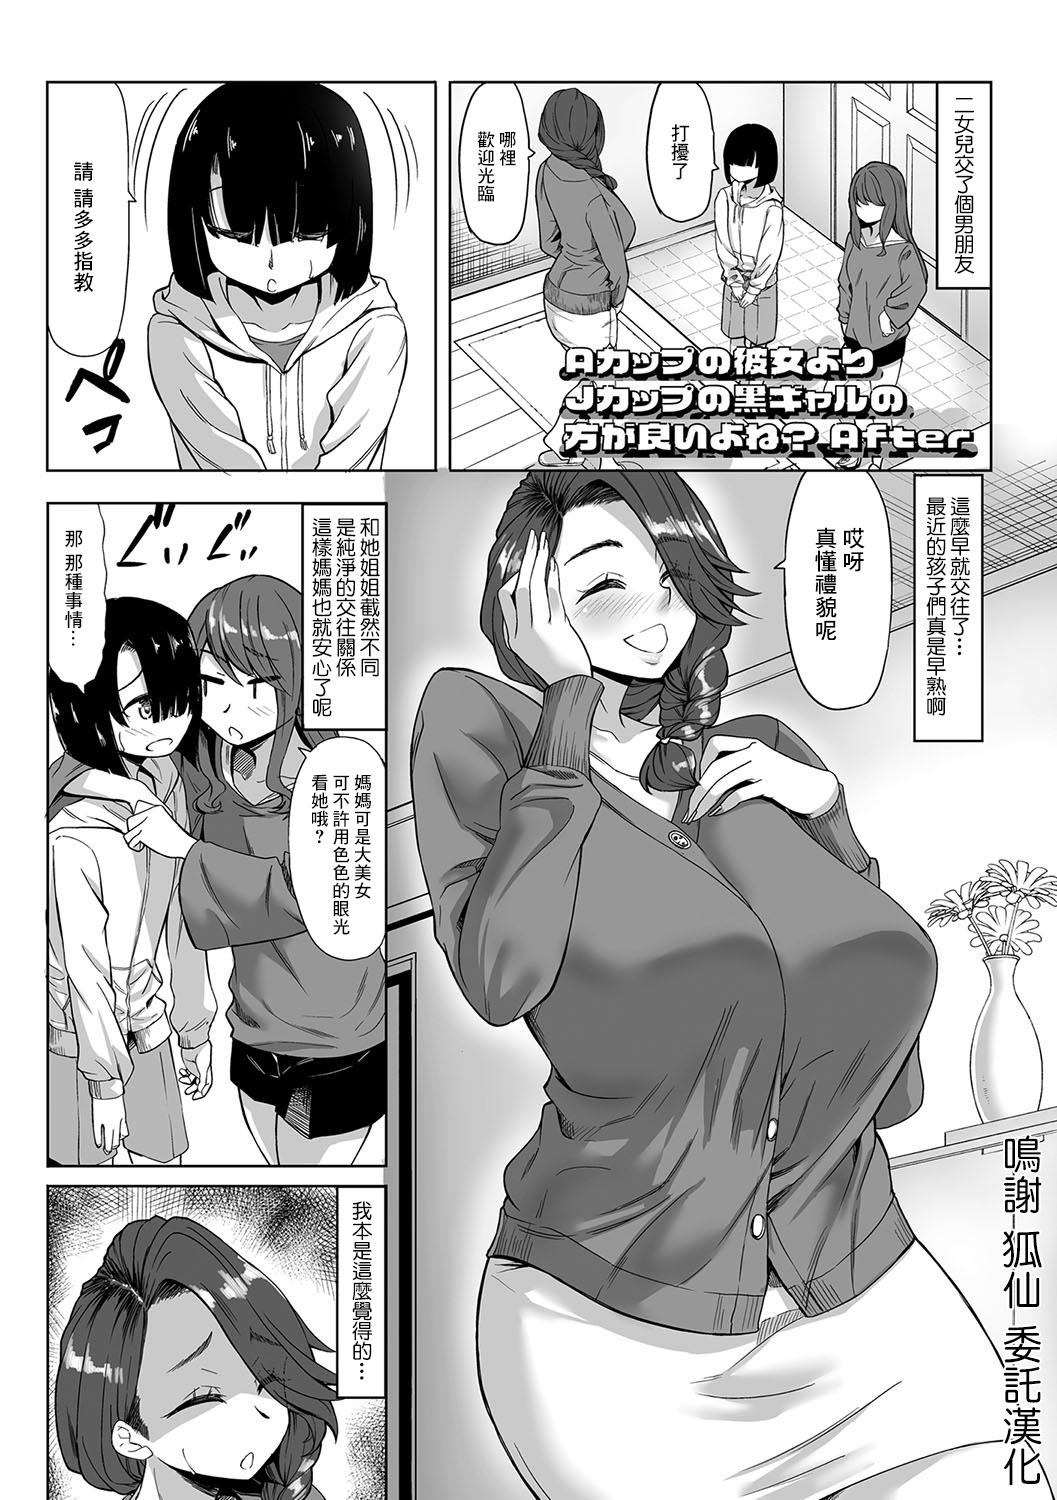 Older Aカップの彼女よりJカップの黒ギャルの方が良いよね After Nudes - Page 1